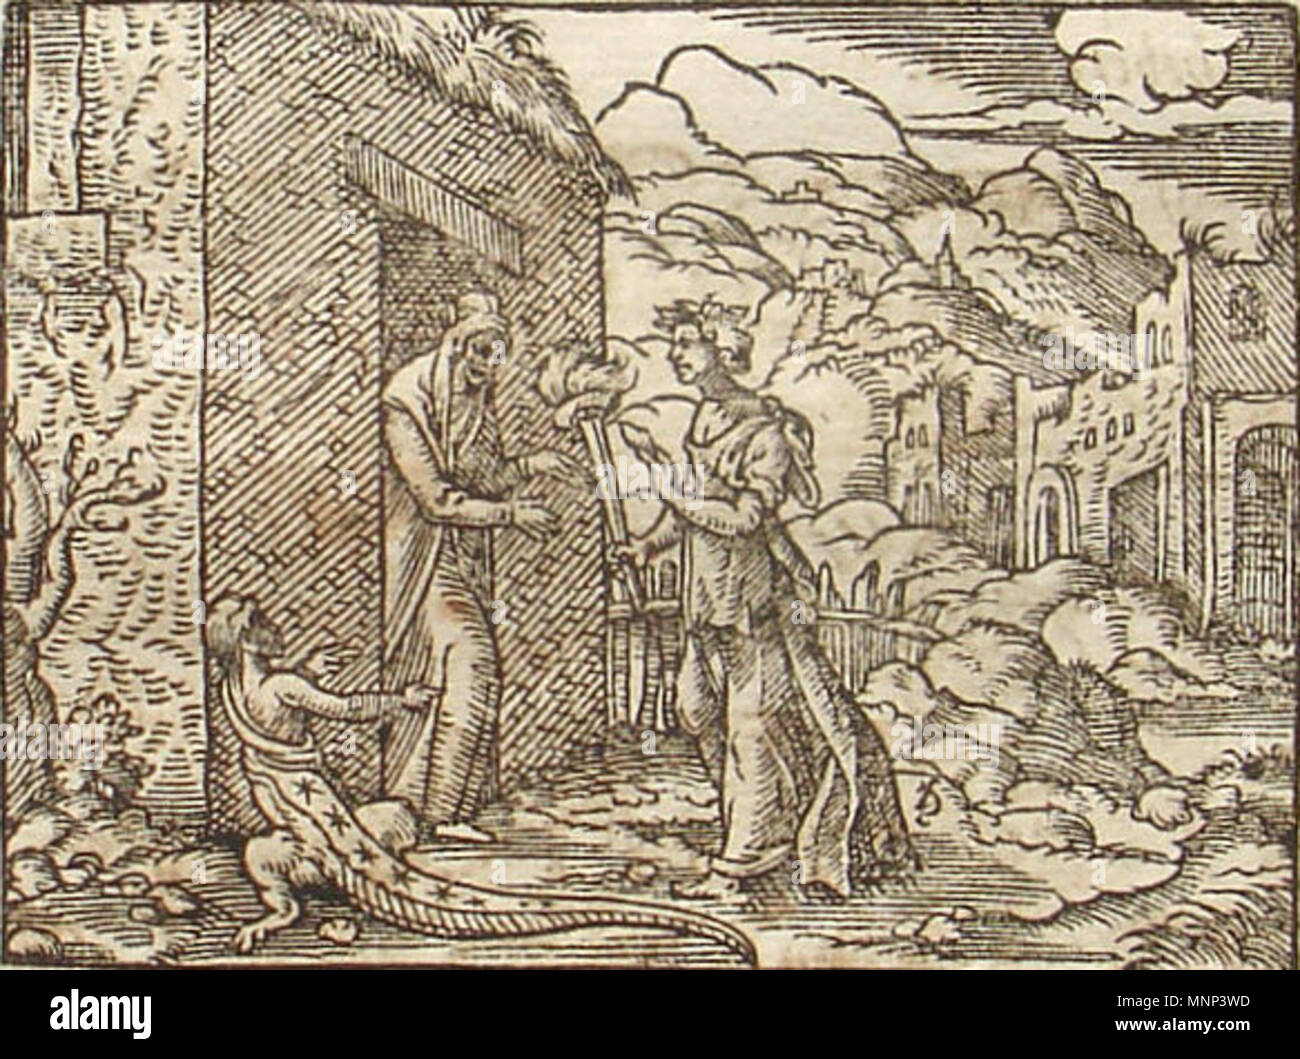 . English: Ceres is mocked by a boy, which is turned into a star lizard (Ovid. Met. V, 449ff). Engraving by Virgil Solis, 1581. 1581.   Virgil Solis  (1514–1562)      Alternative names Solis, Virgilius  Description German painter and engraver  Date of birth/death 1514 1 August 1562  Location of birth/death Nuremberg Nuremberg  Work location Nuremberg  Authority control  : Q563366 VIAF: 17337630 ISNI: 0000 0001 2122 4677 ULAN: 500007753 LCCN: n81017860 GND: 118615300 WorldCat 951 Ovid Met 5 - Star Lizard - Virgil Solis 1581 Stock Photo